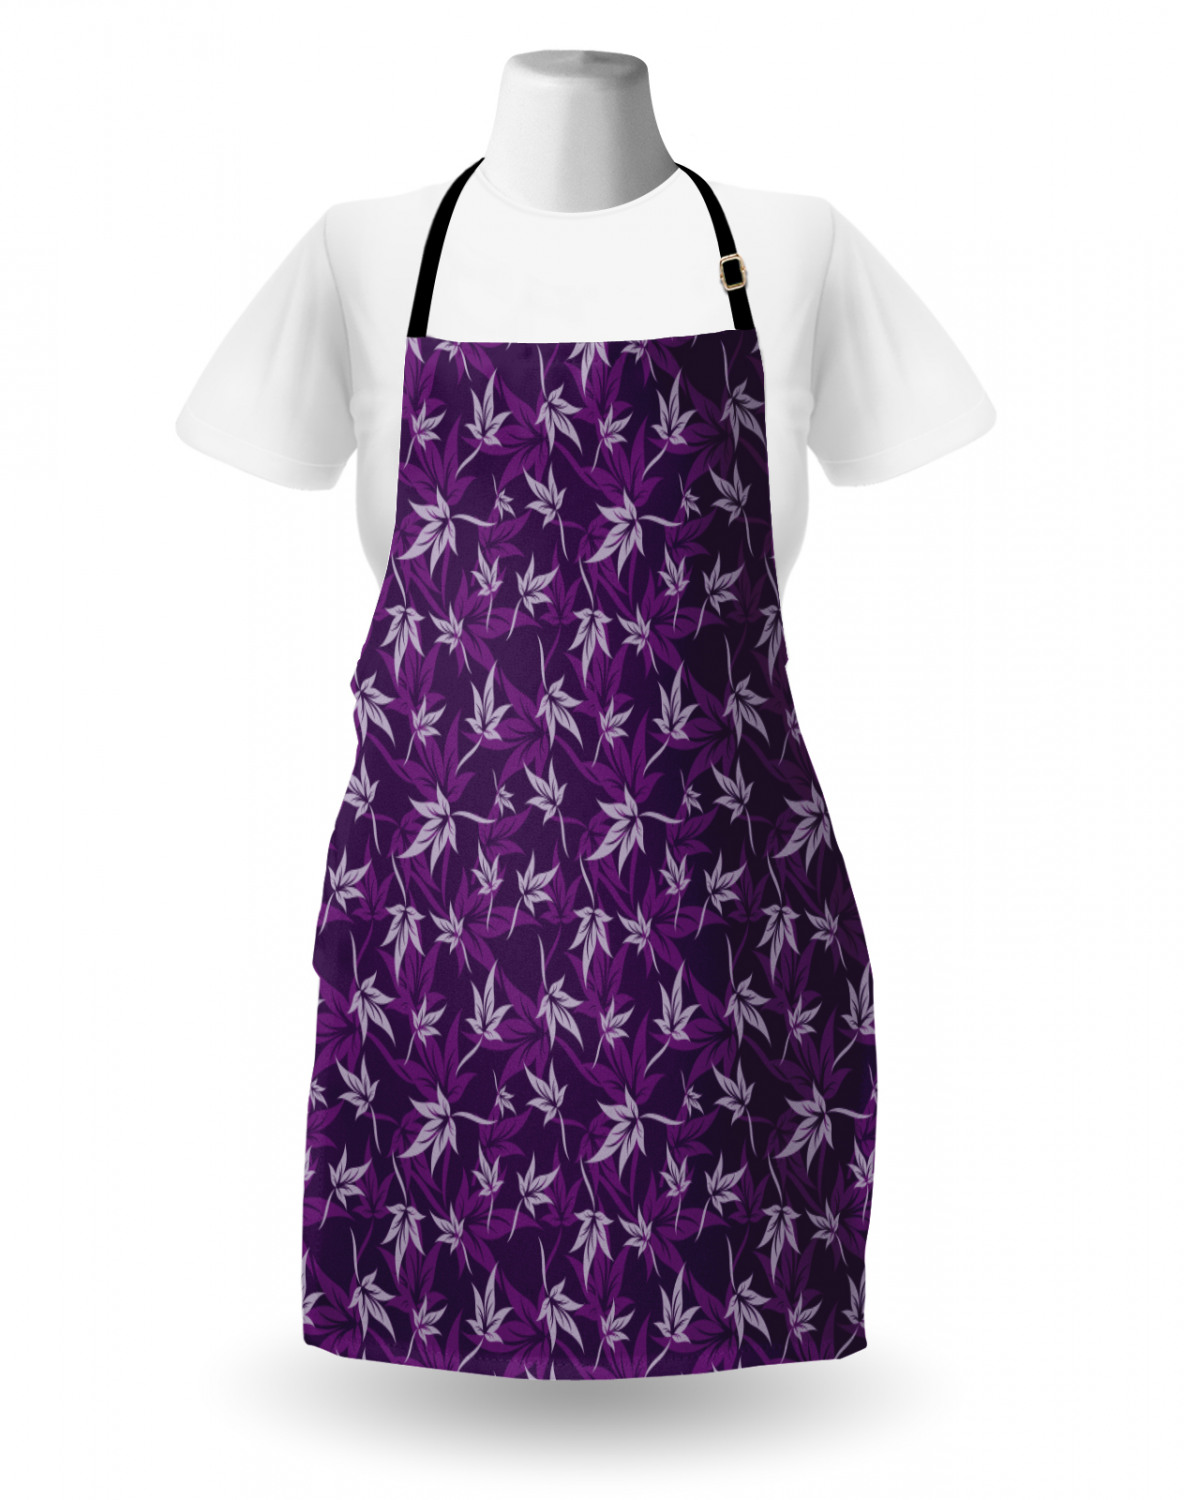 Details about   Ambesonne Apron Unisex Kitchen Tool with Adjustable Strap for Working 